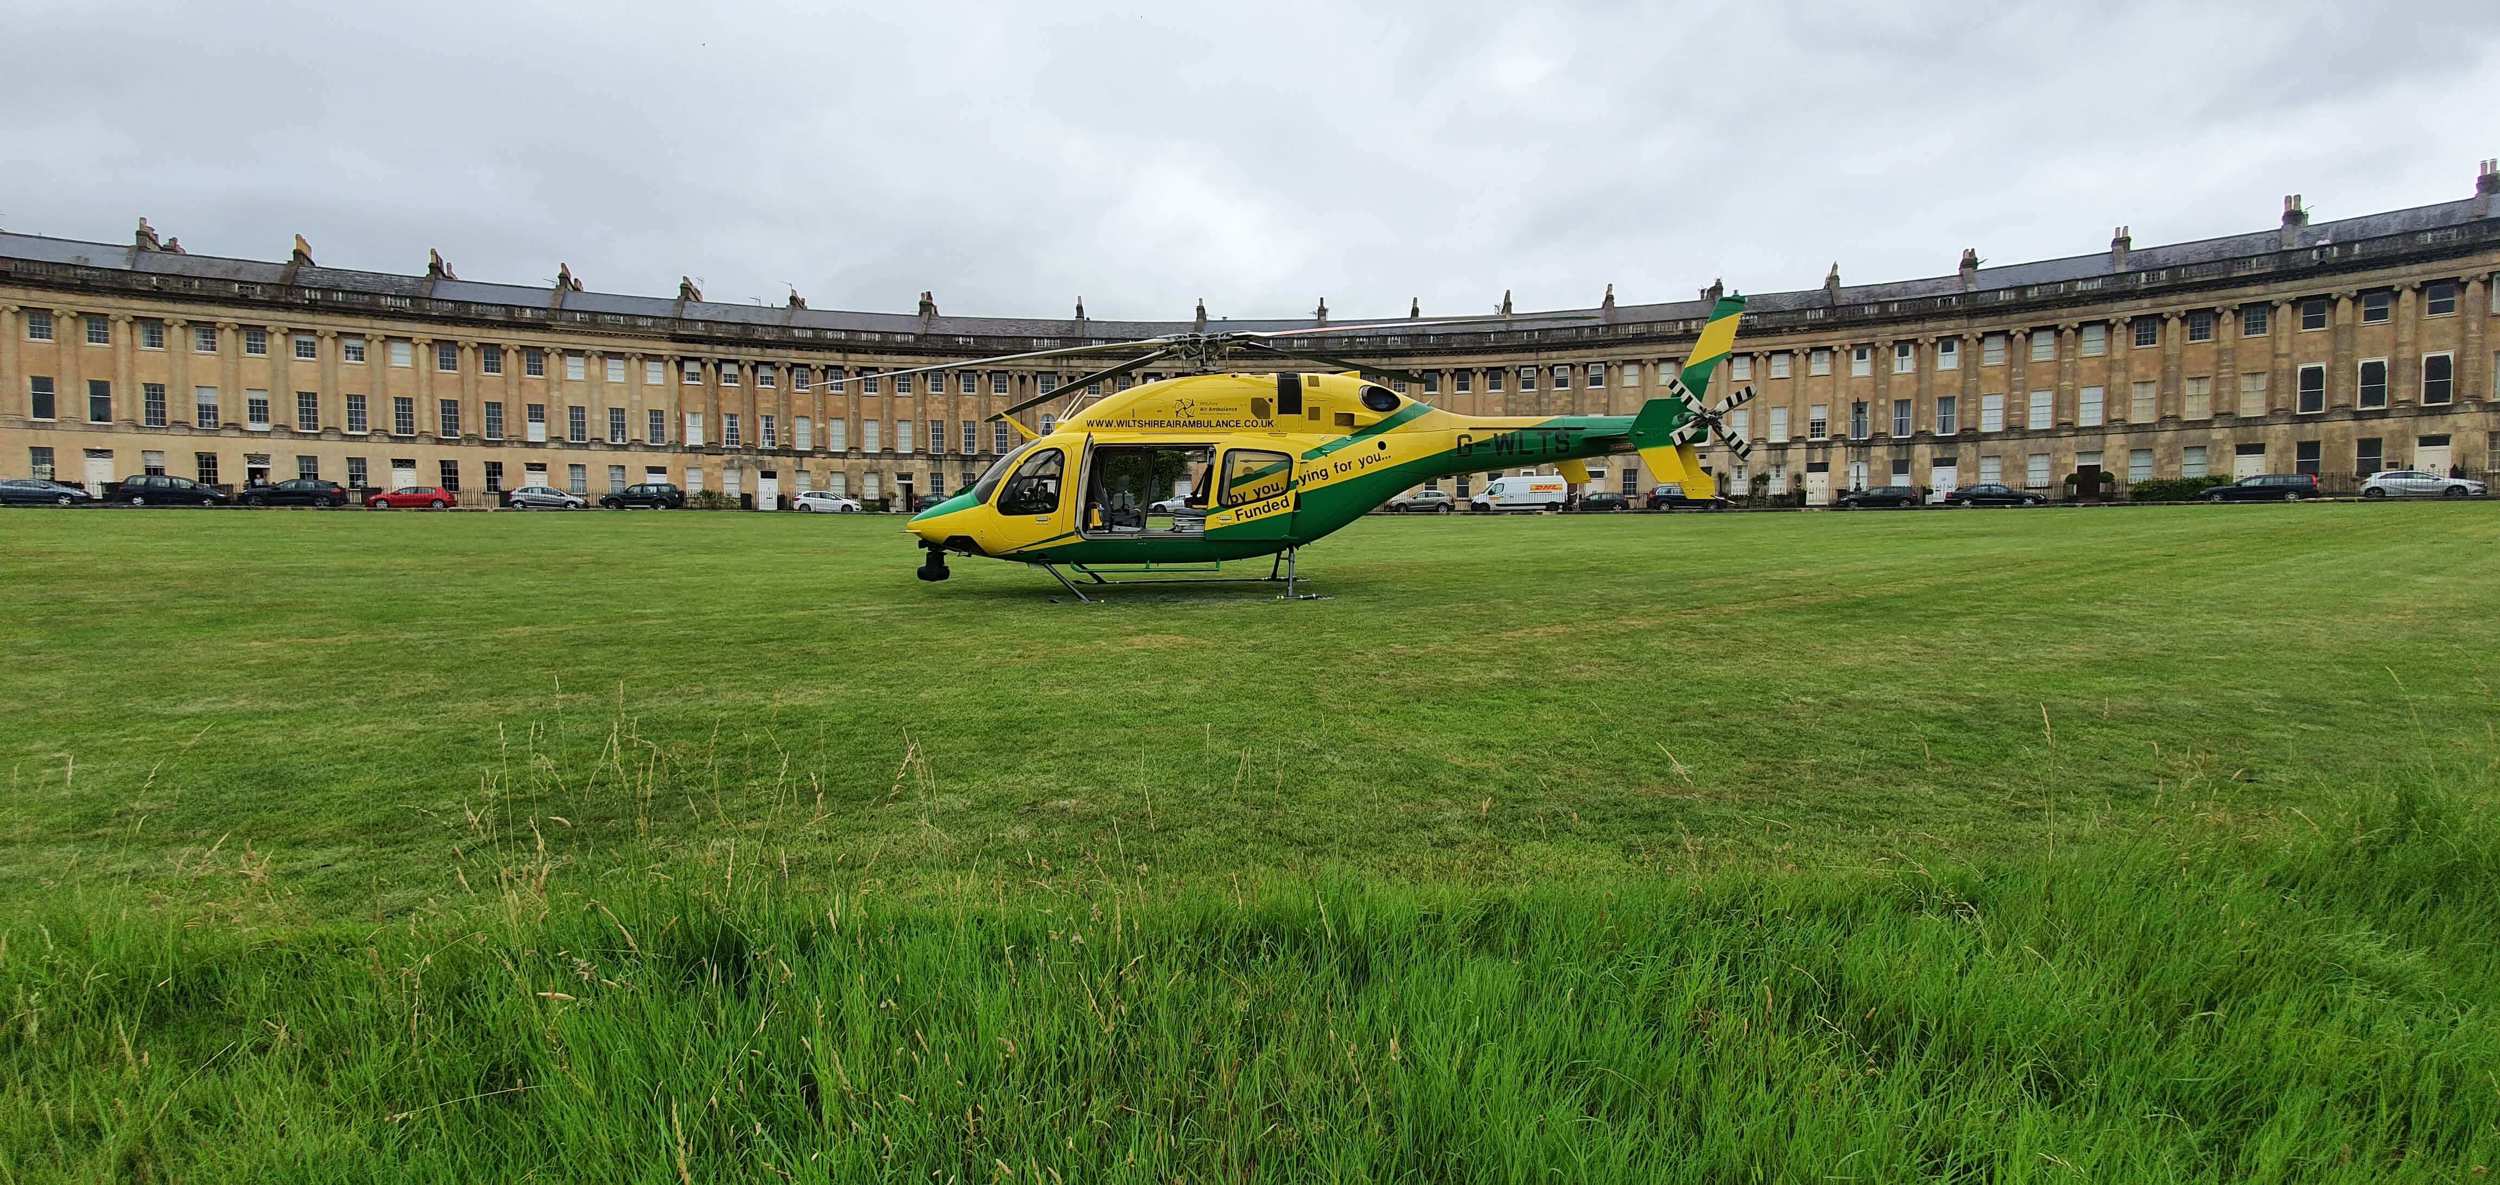 Wiltshire Air Ambulance's yellow and green helicopter parked in front of the Royal Crescent in Bath